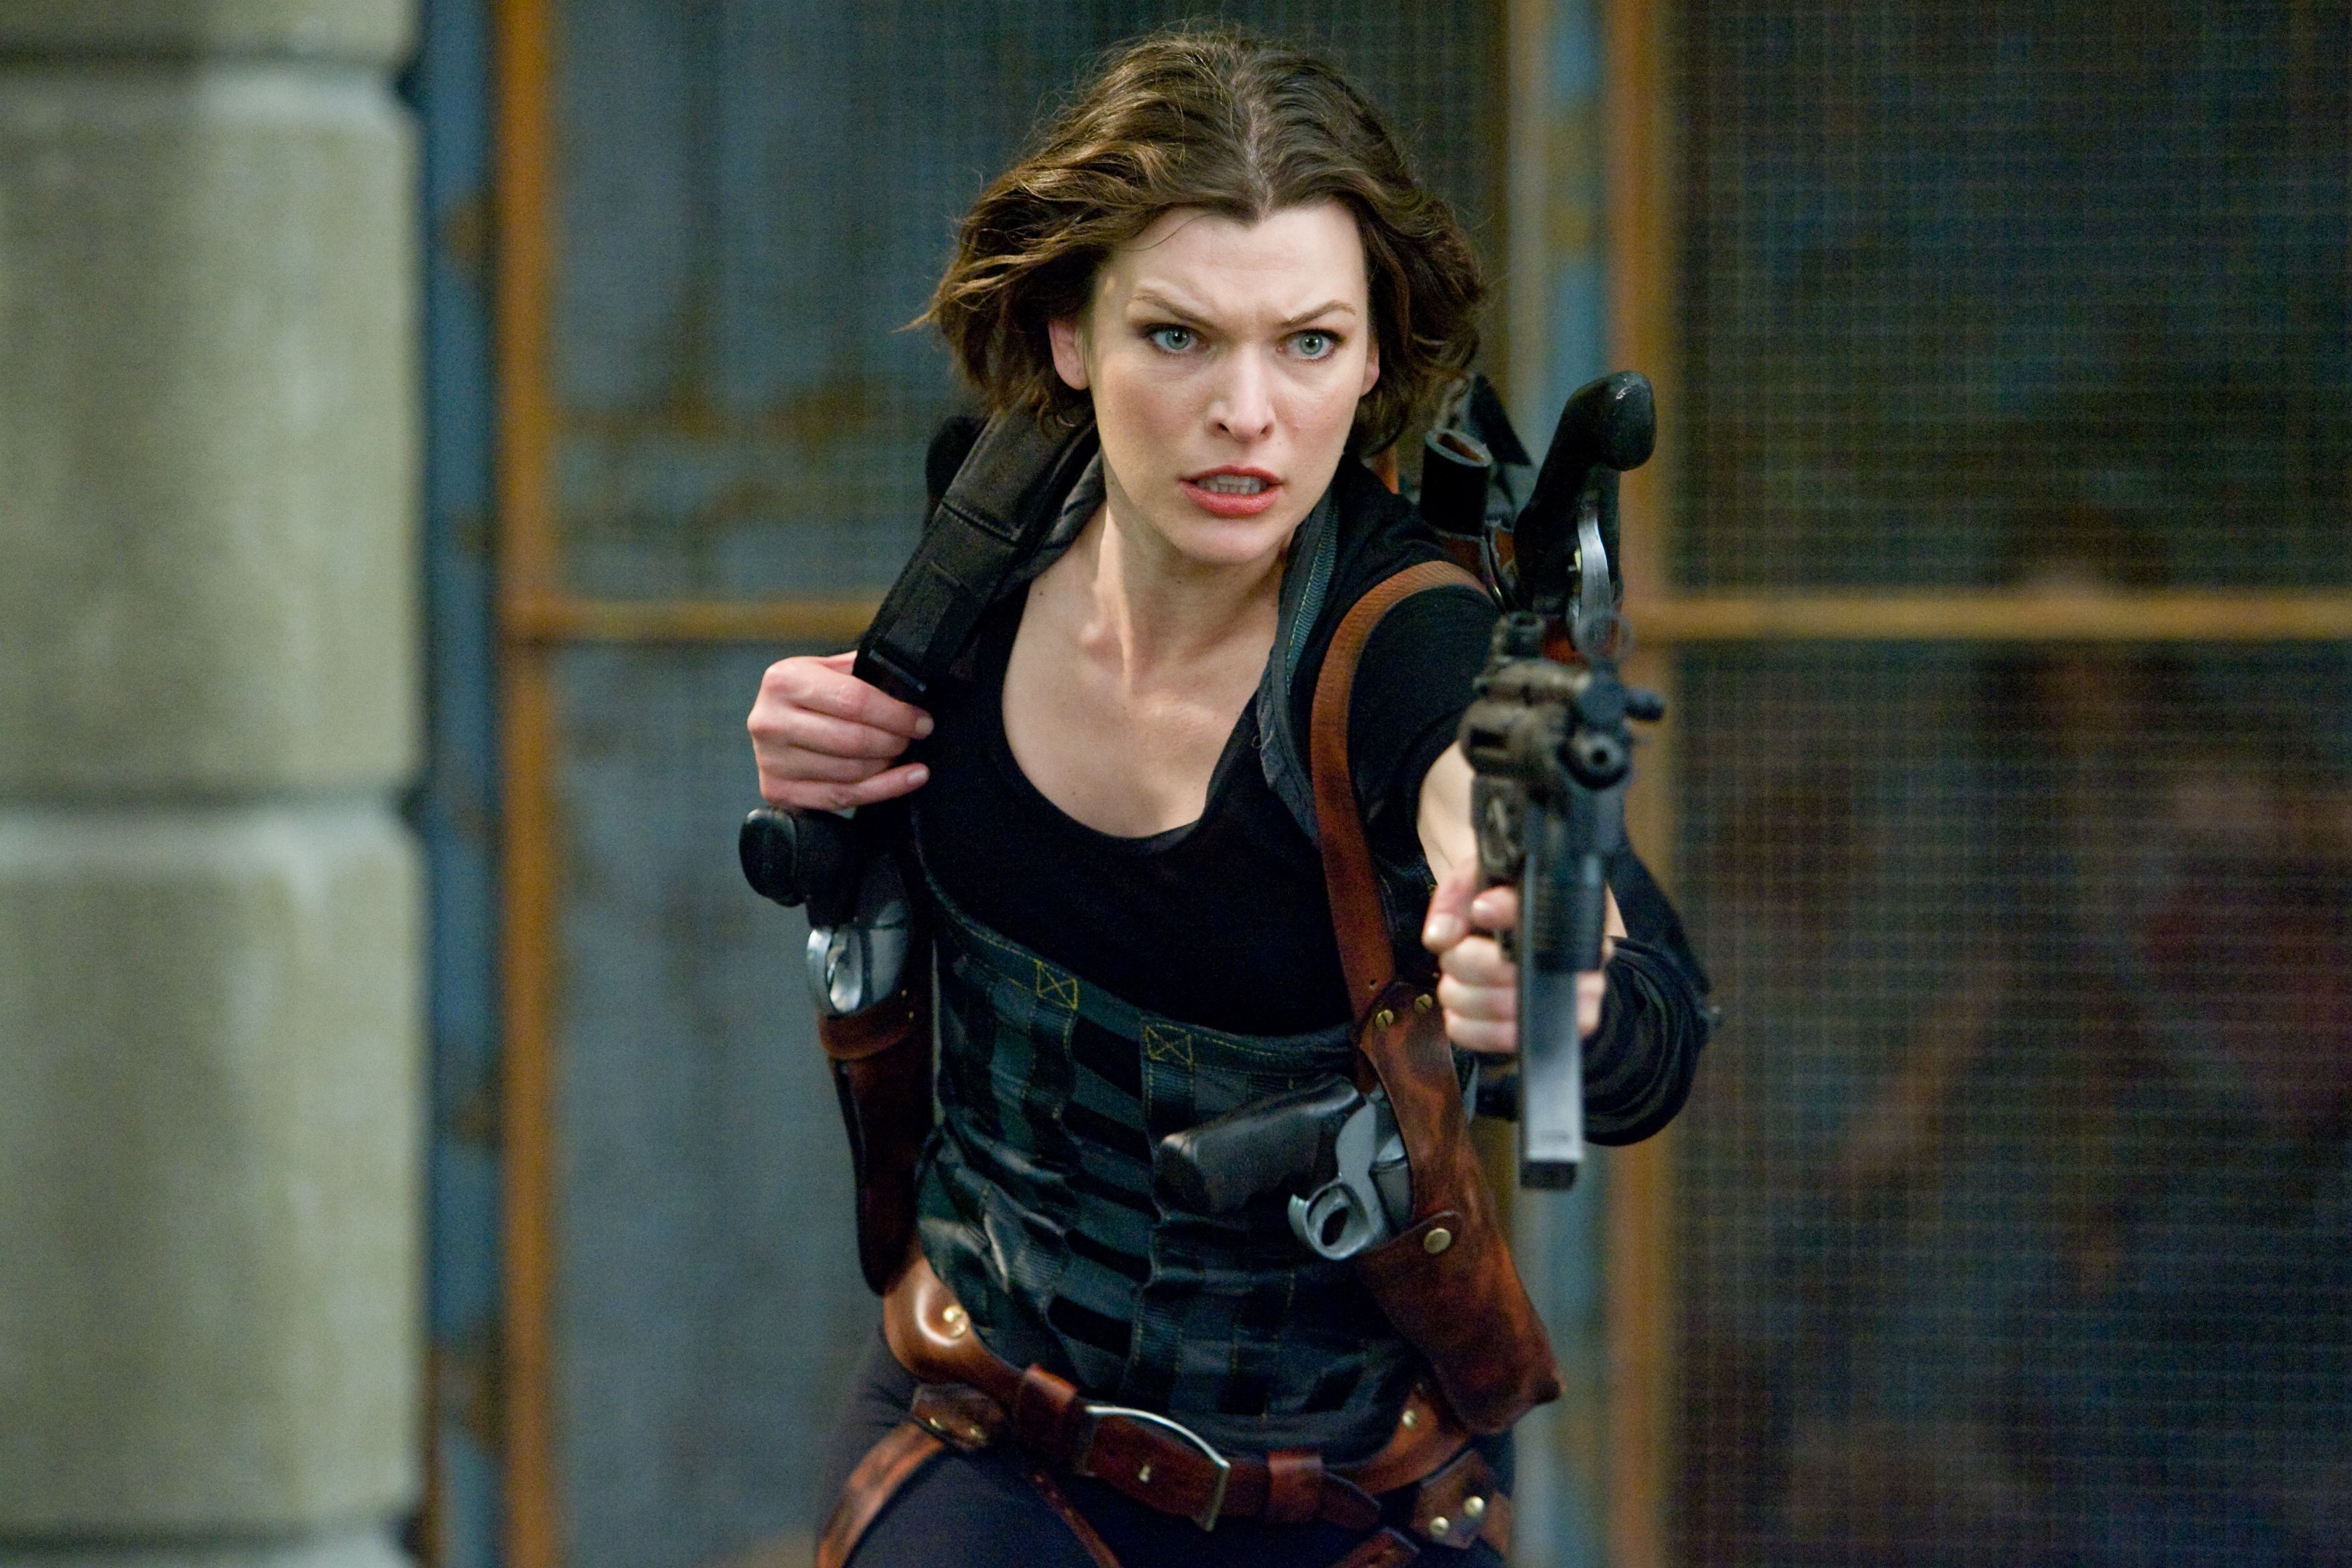 Milla Jovovich in Resident Evil: Afterlife